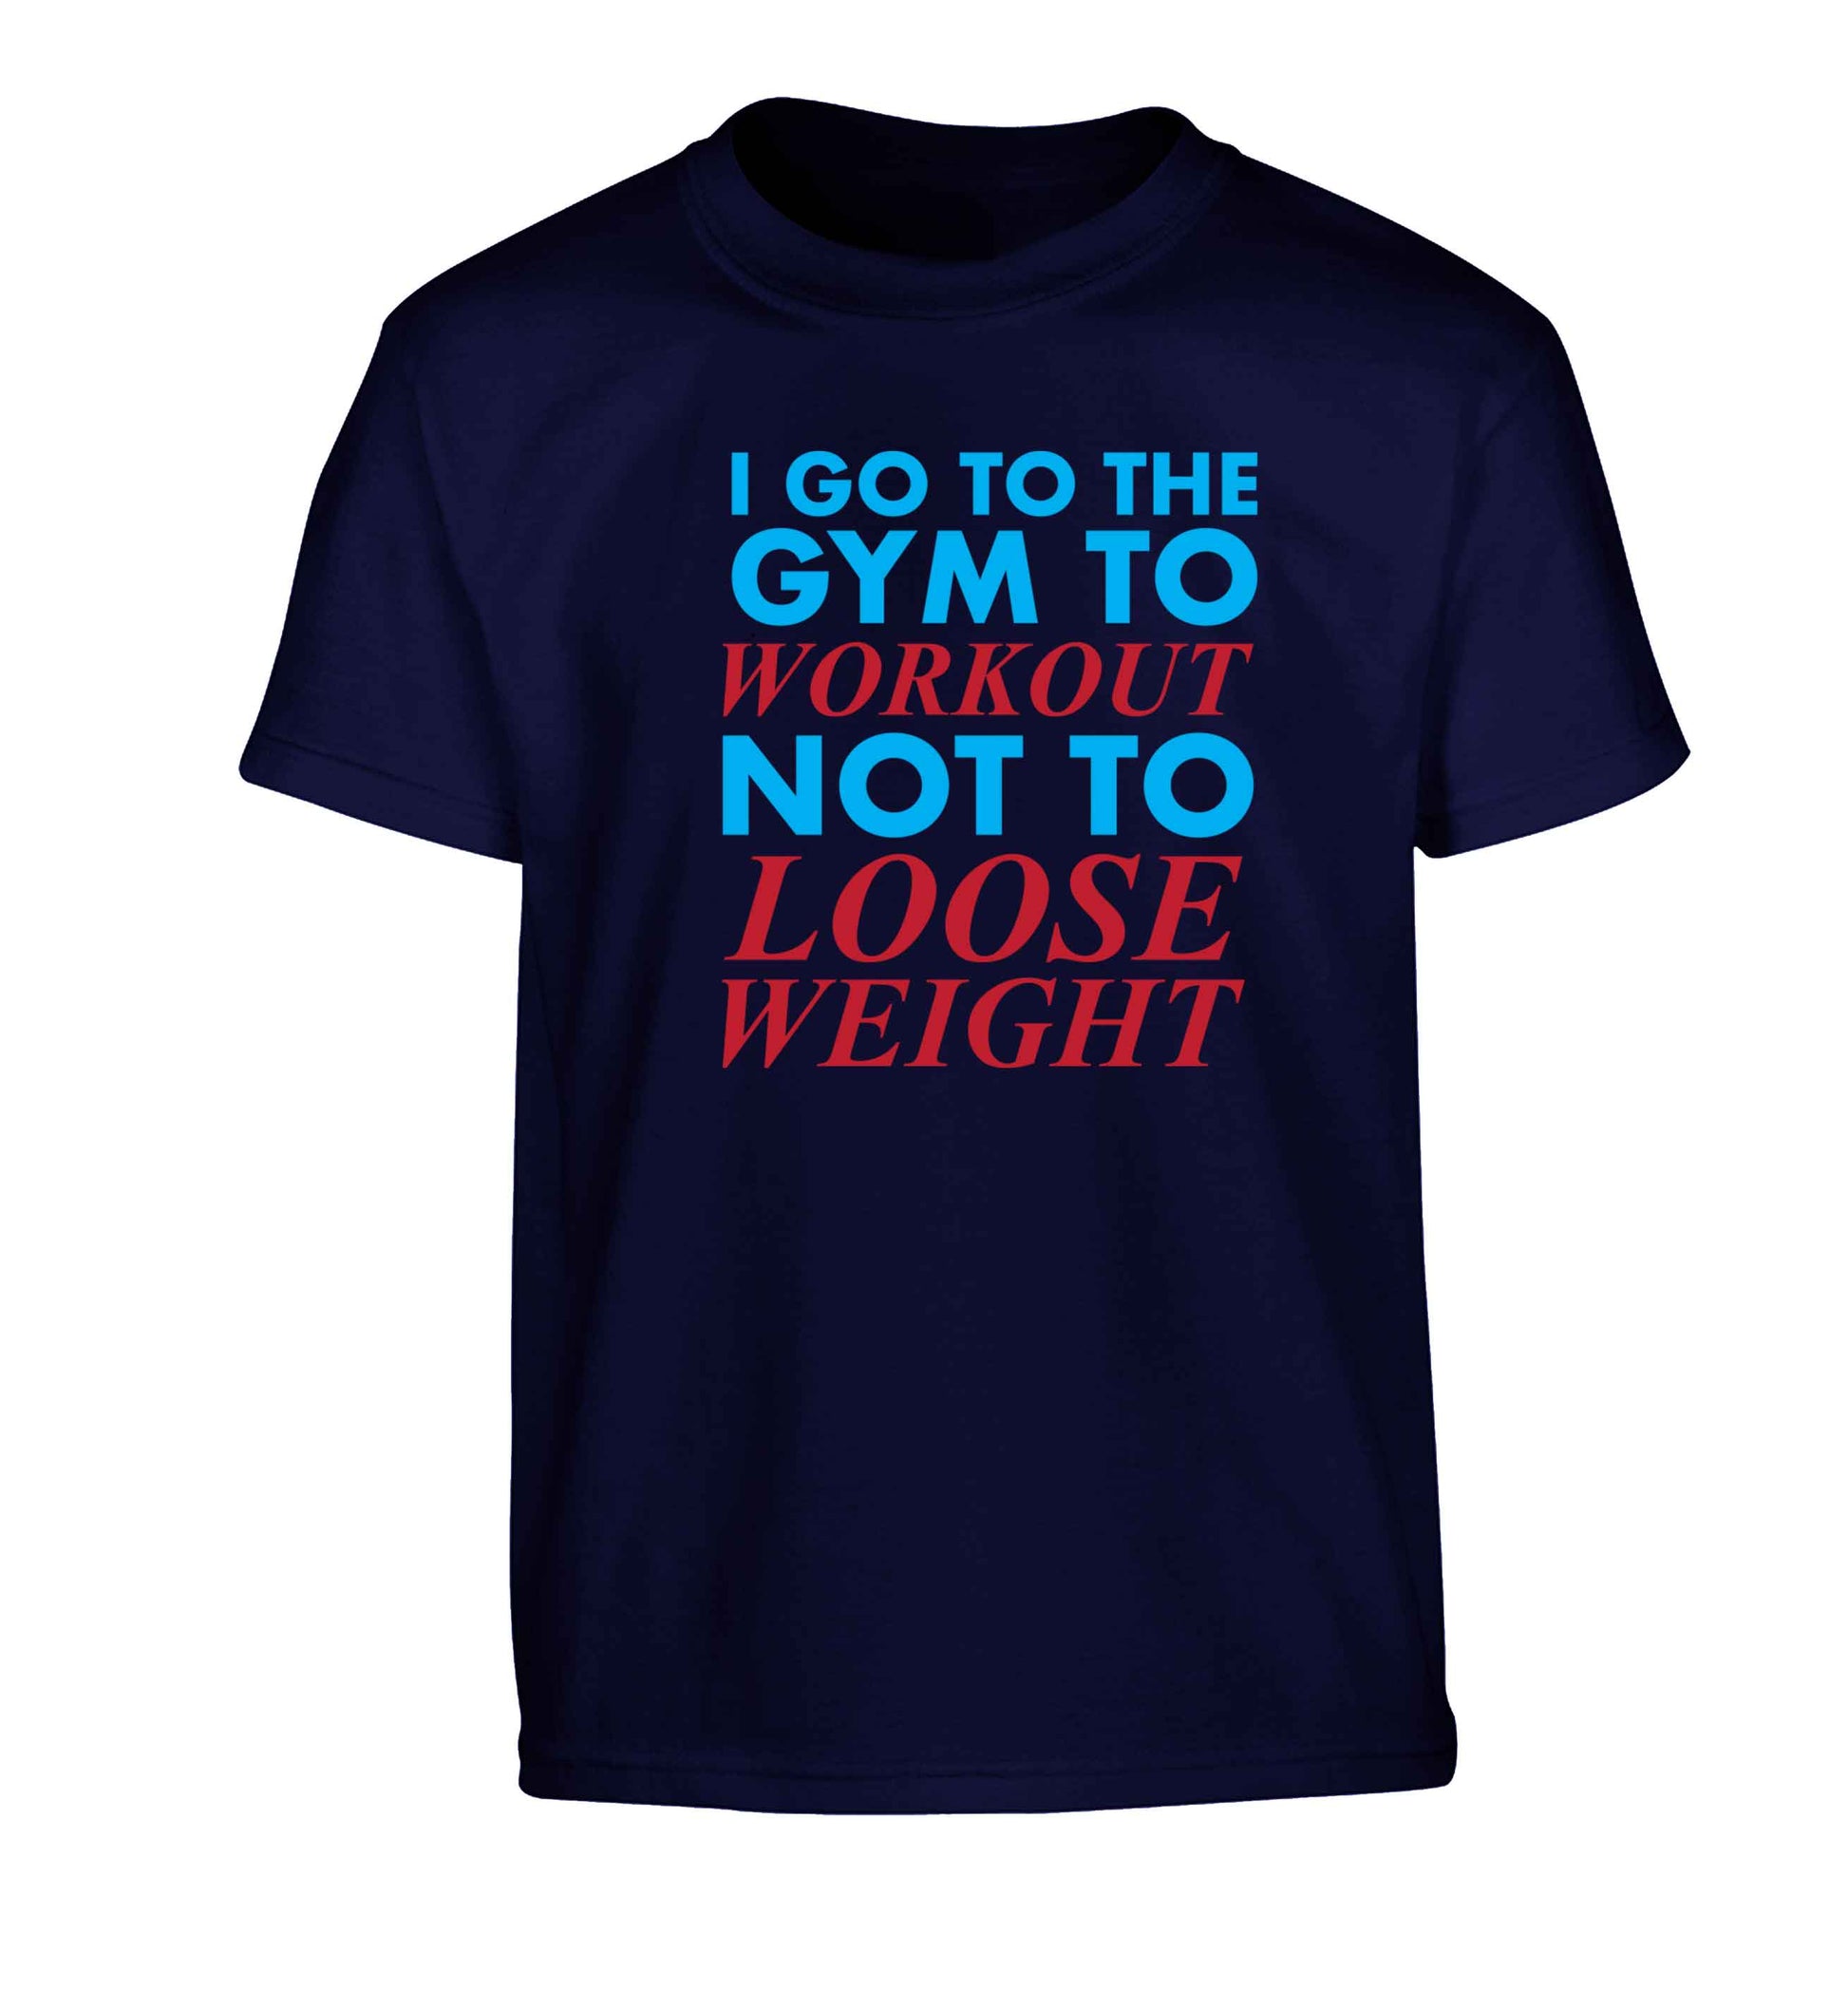 I go to the gym to workout not to loose weight Children's navy Tshirt 12-13 Years